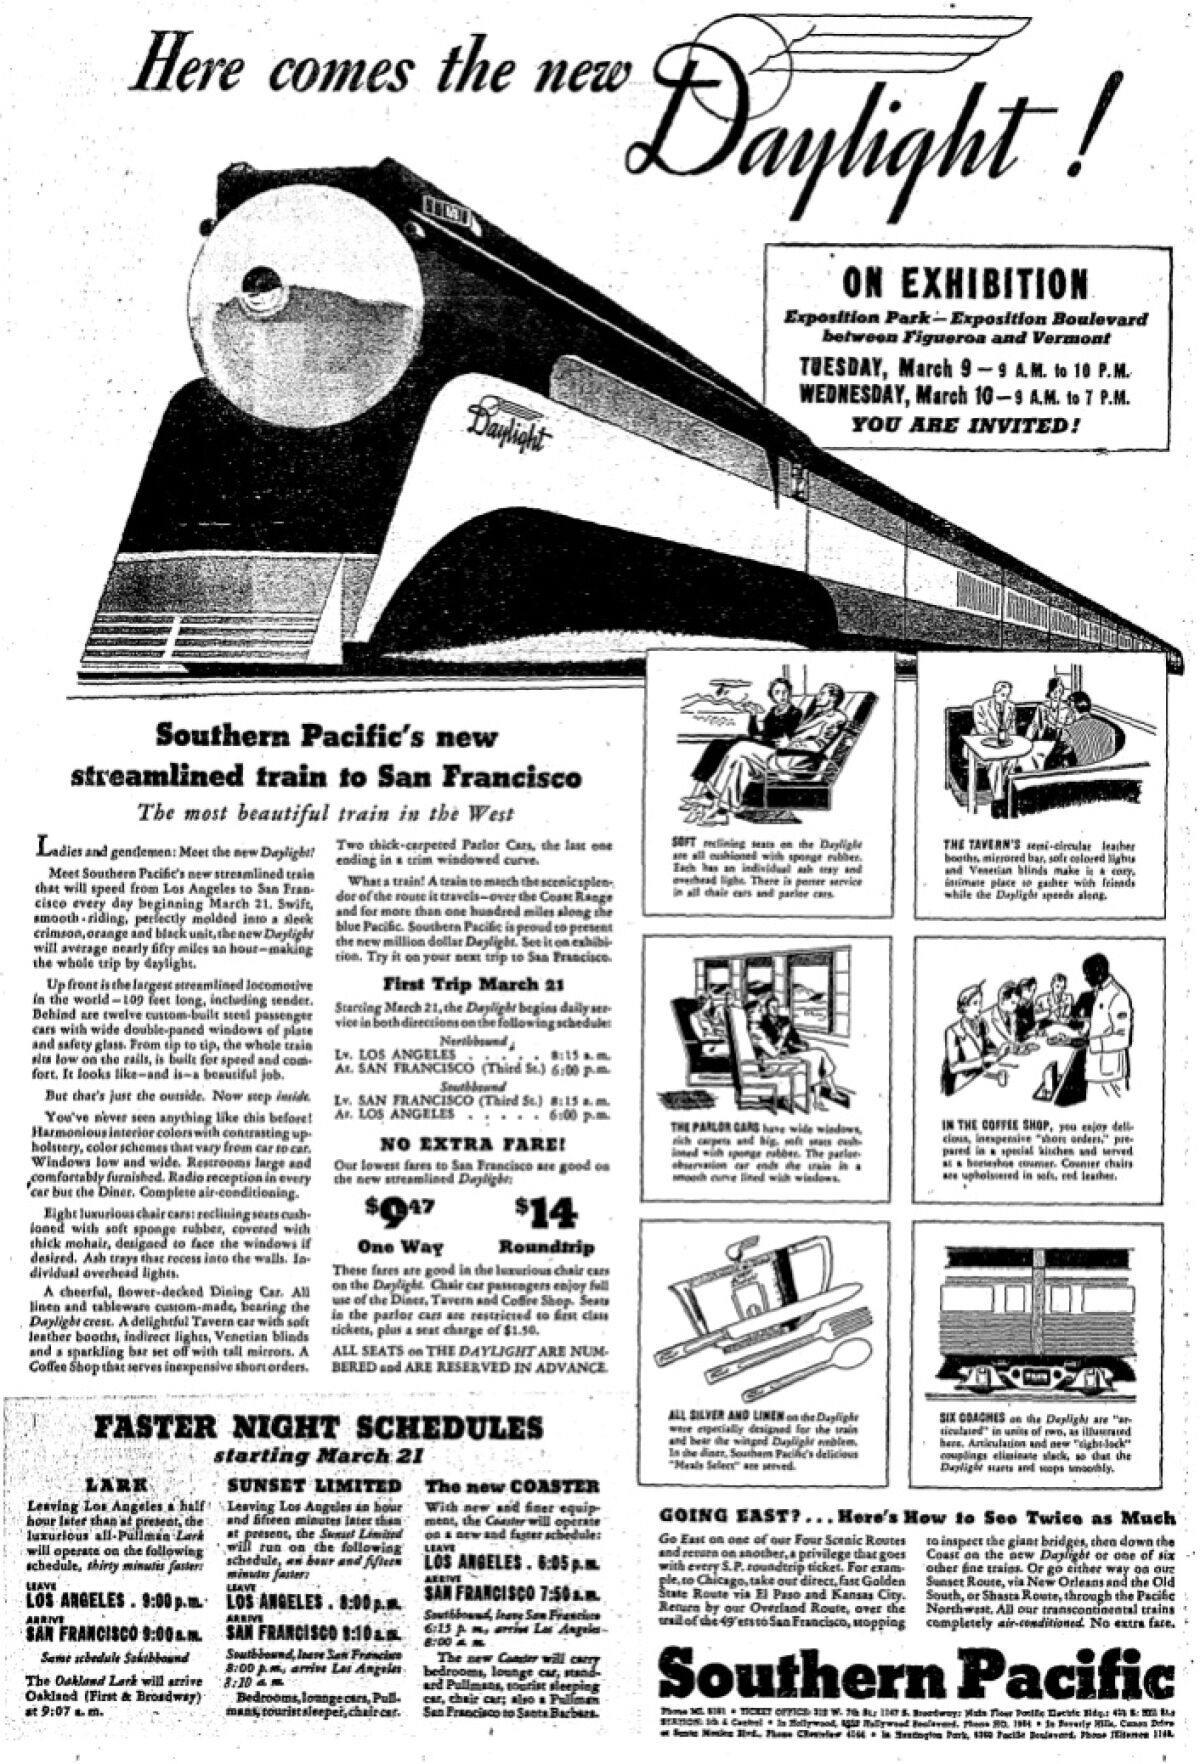 A newspaper ad for the Daylight train, between L.A. and San Francisco, that ran in The Times in March 1937.